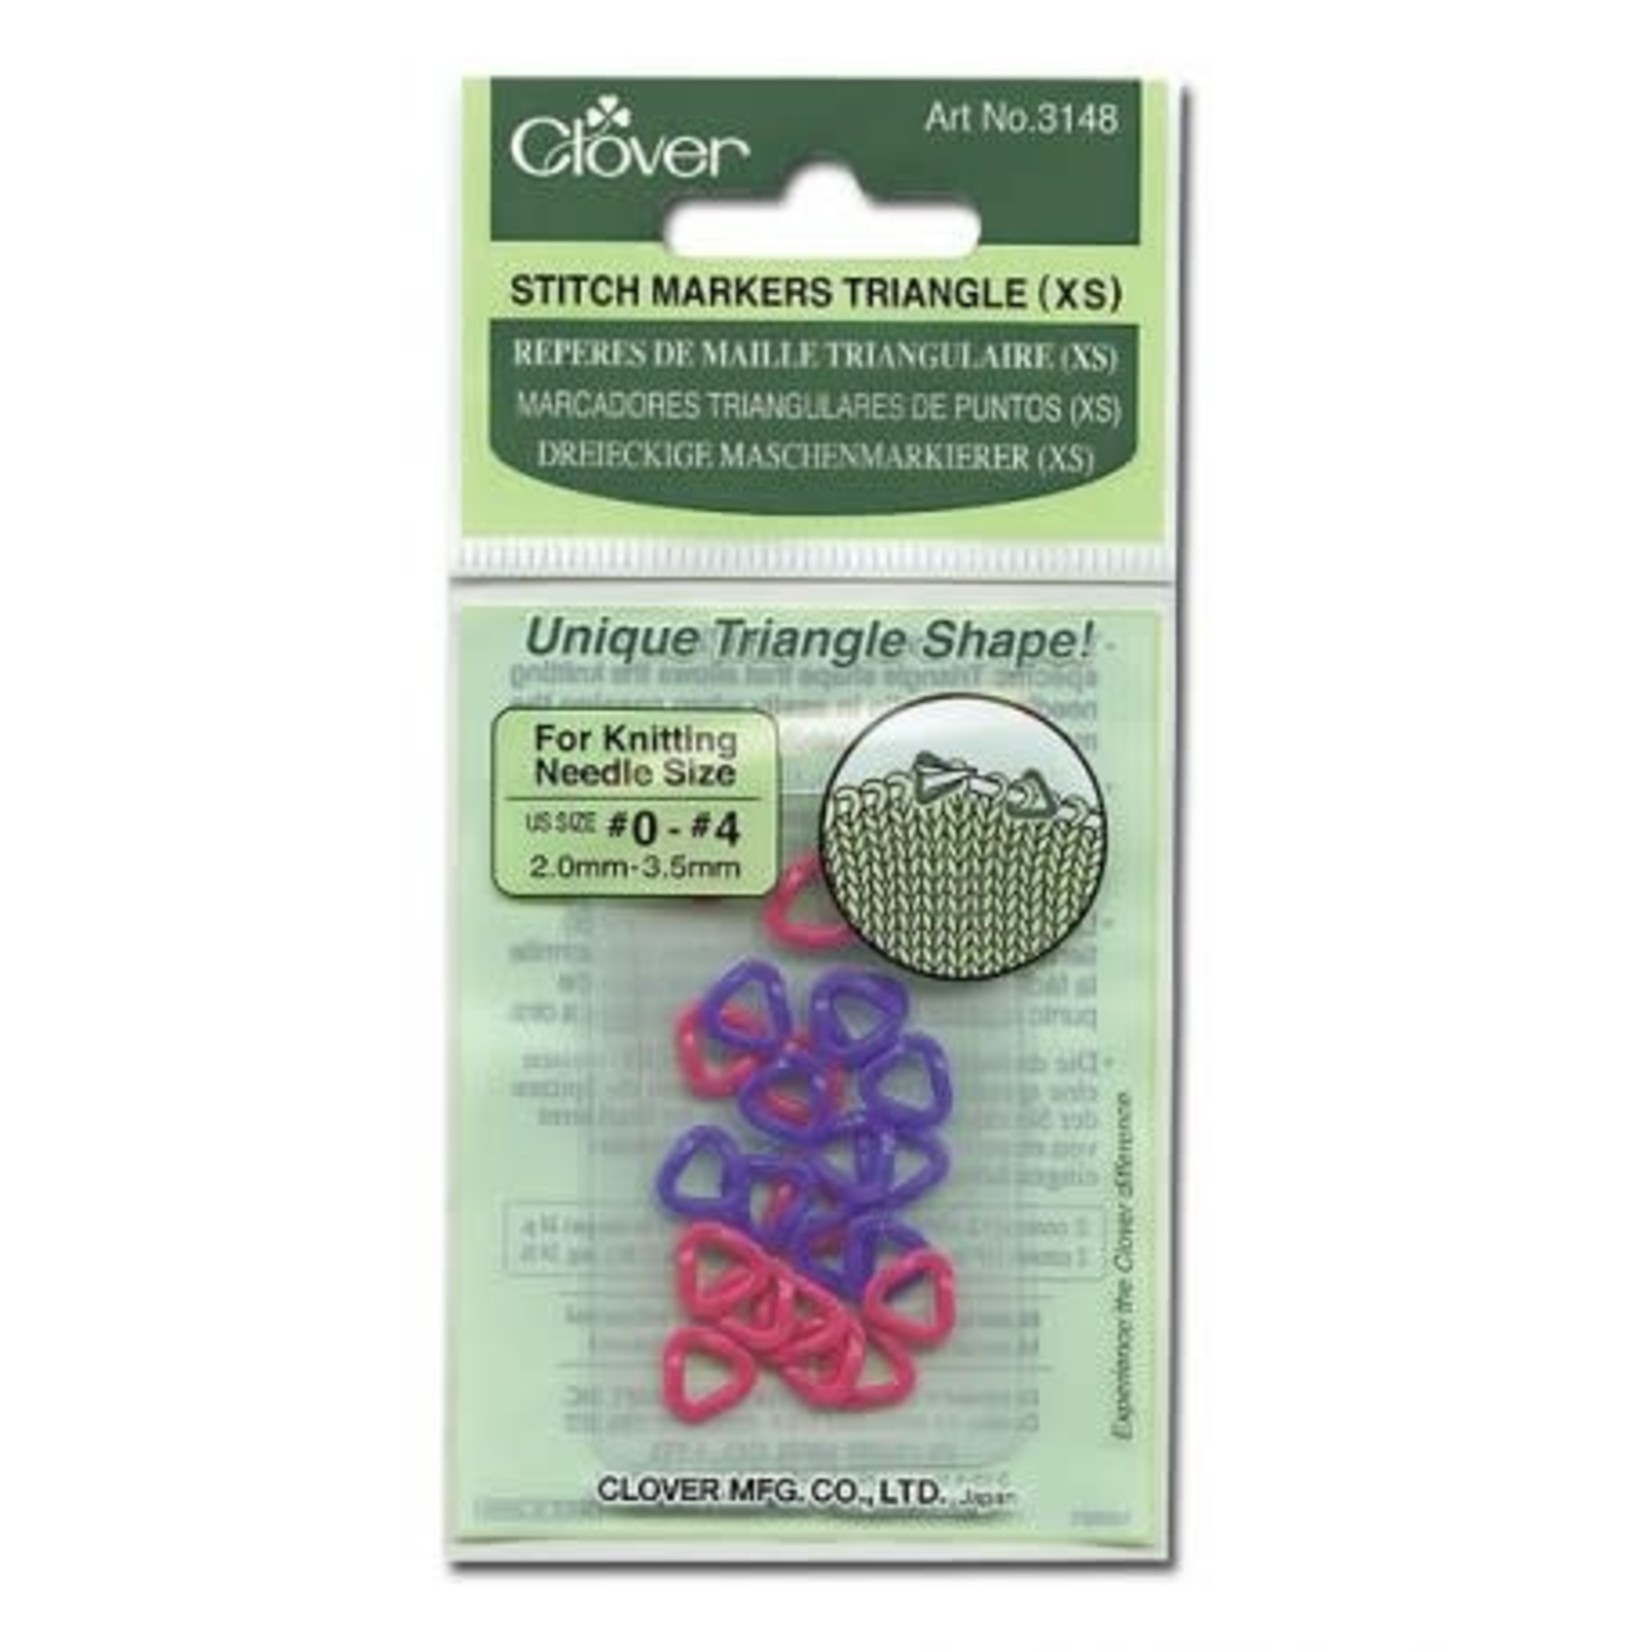 Clover Clover Stitch Markers Triangle (XS)